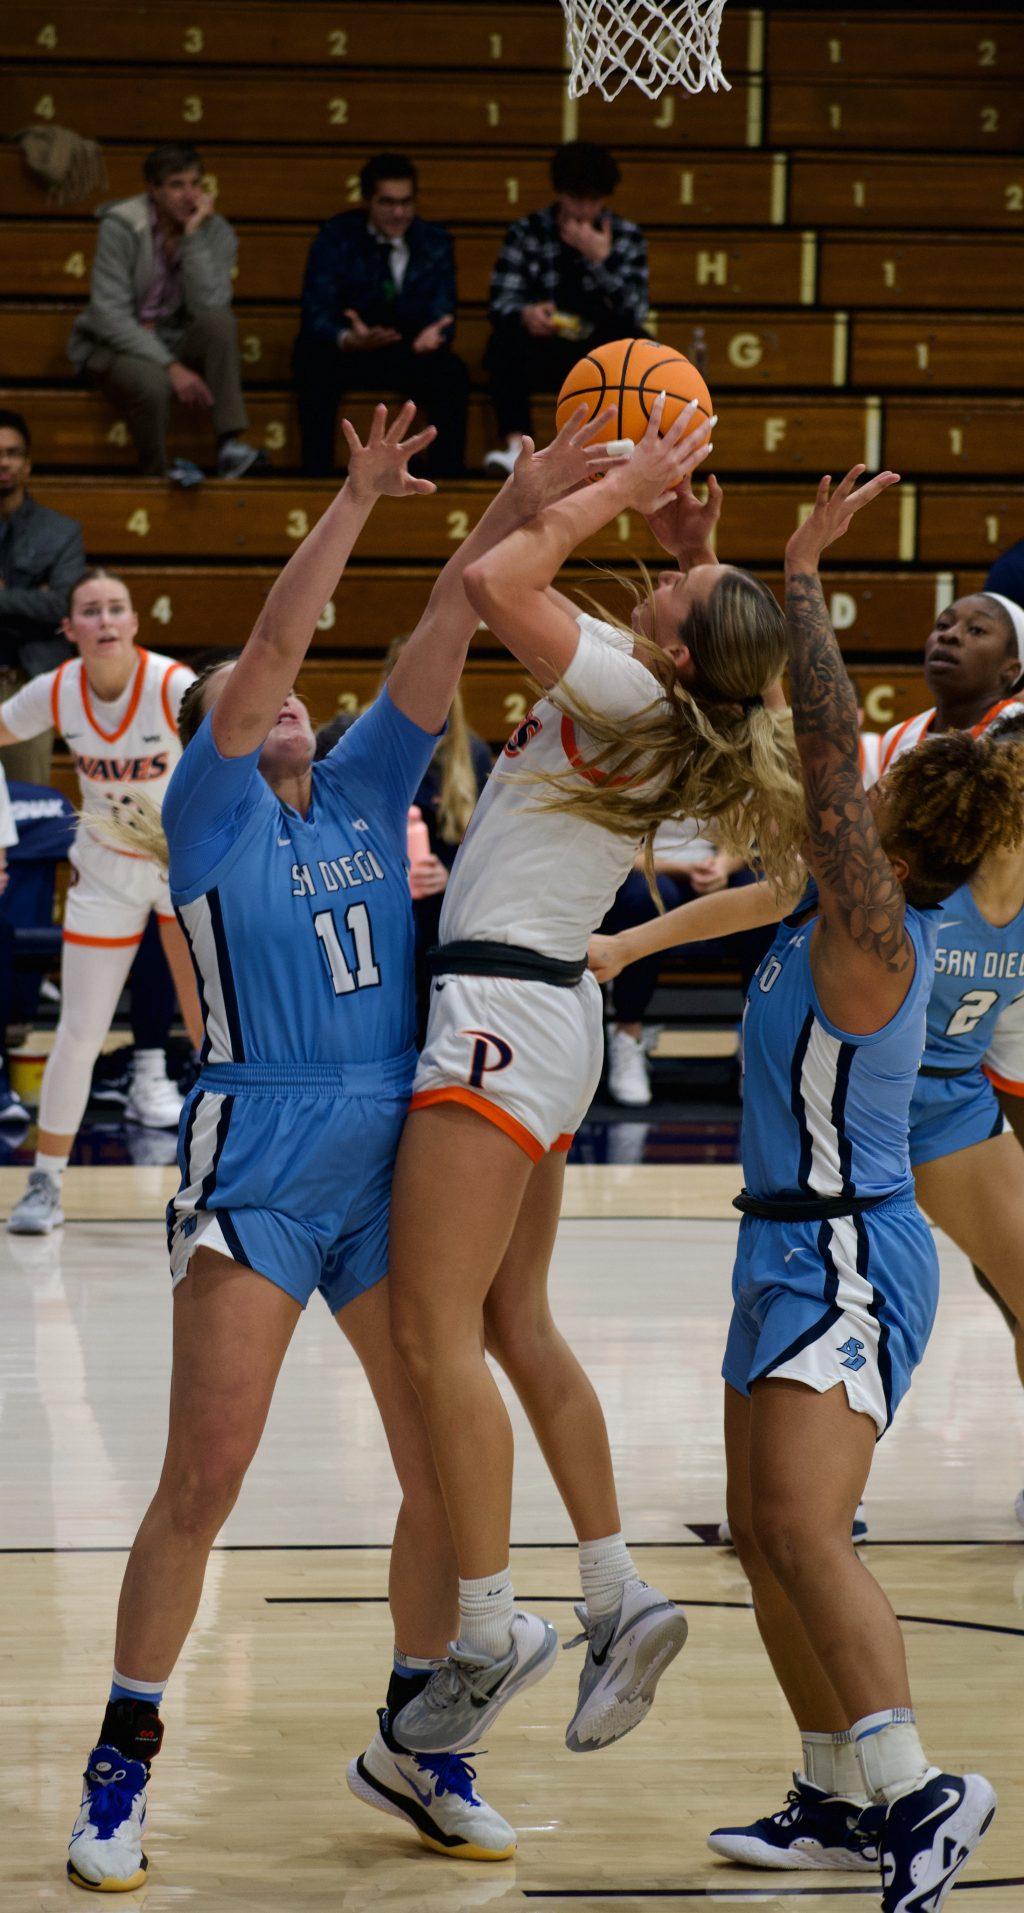 Pepperdine junior forward Jane Nwaba hits a jumper against a San Diego defender Jan. 12, at Firestone Fieldhouse. Nwaba finished the game with 10 points, six rebounds and an assist. Photos by Colton Rubsamen